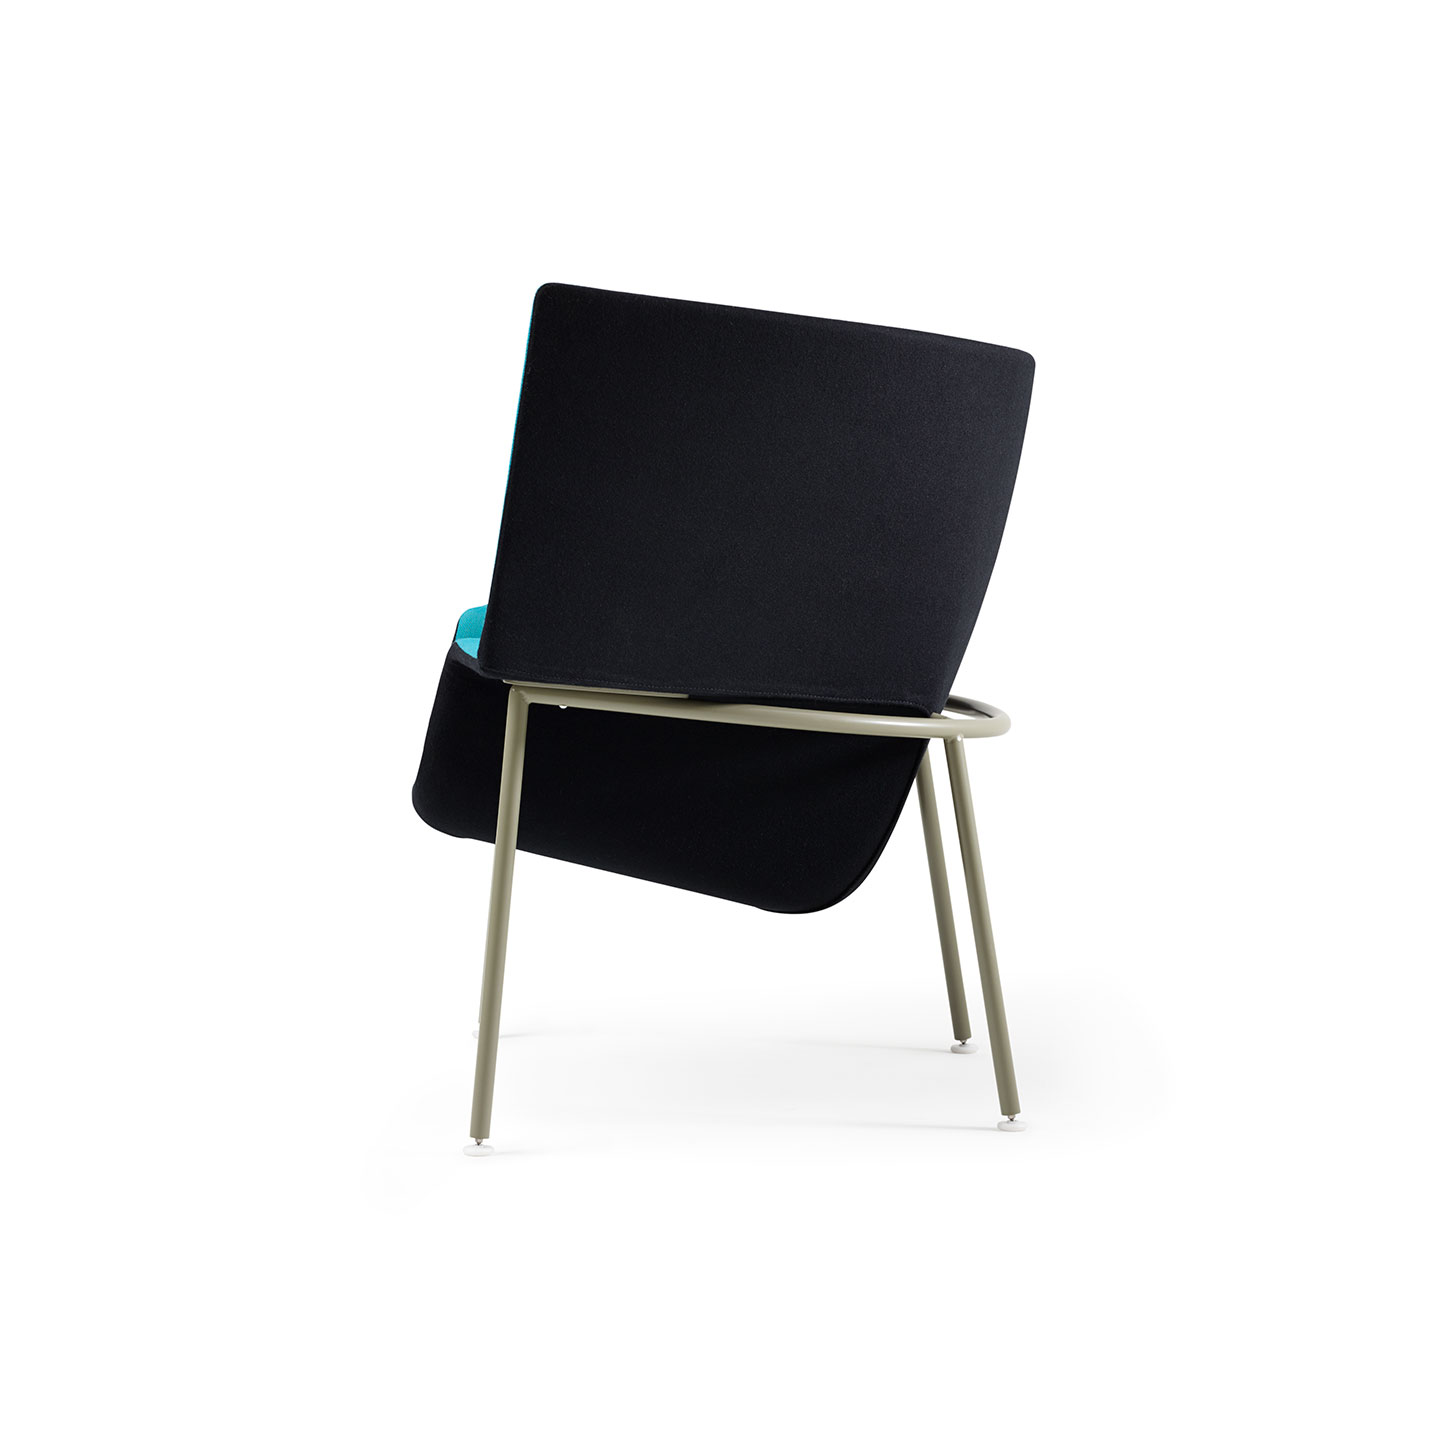 Haworth Capo lounge chair in black exterior and teal interior showing side view